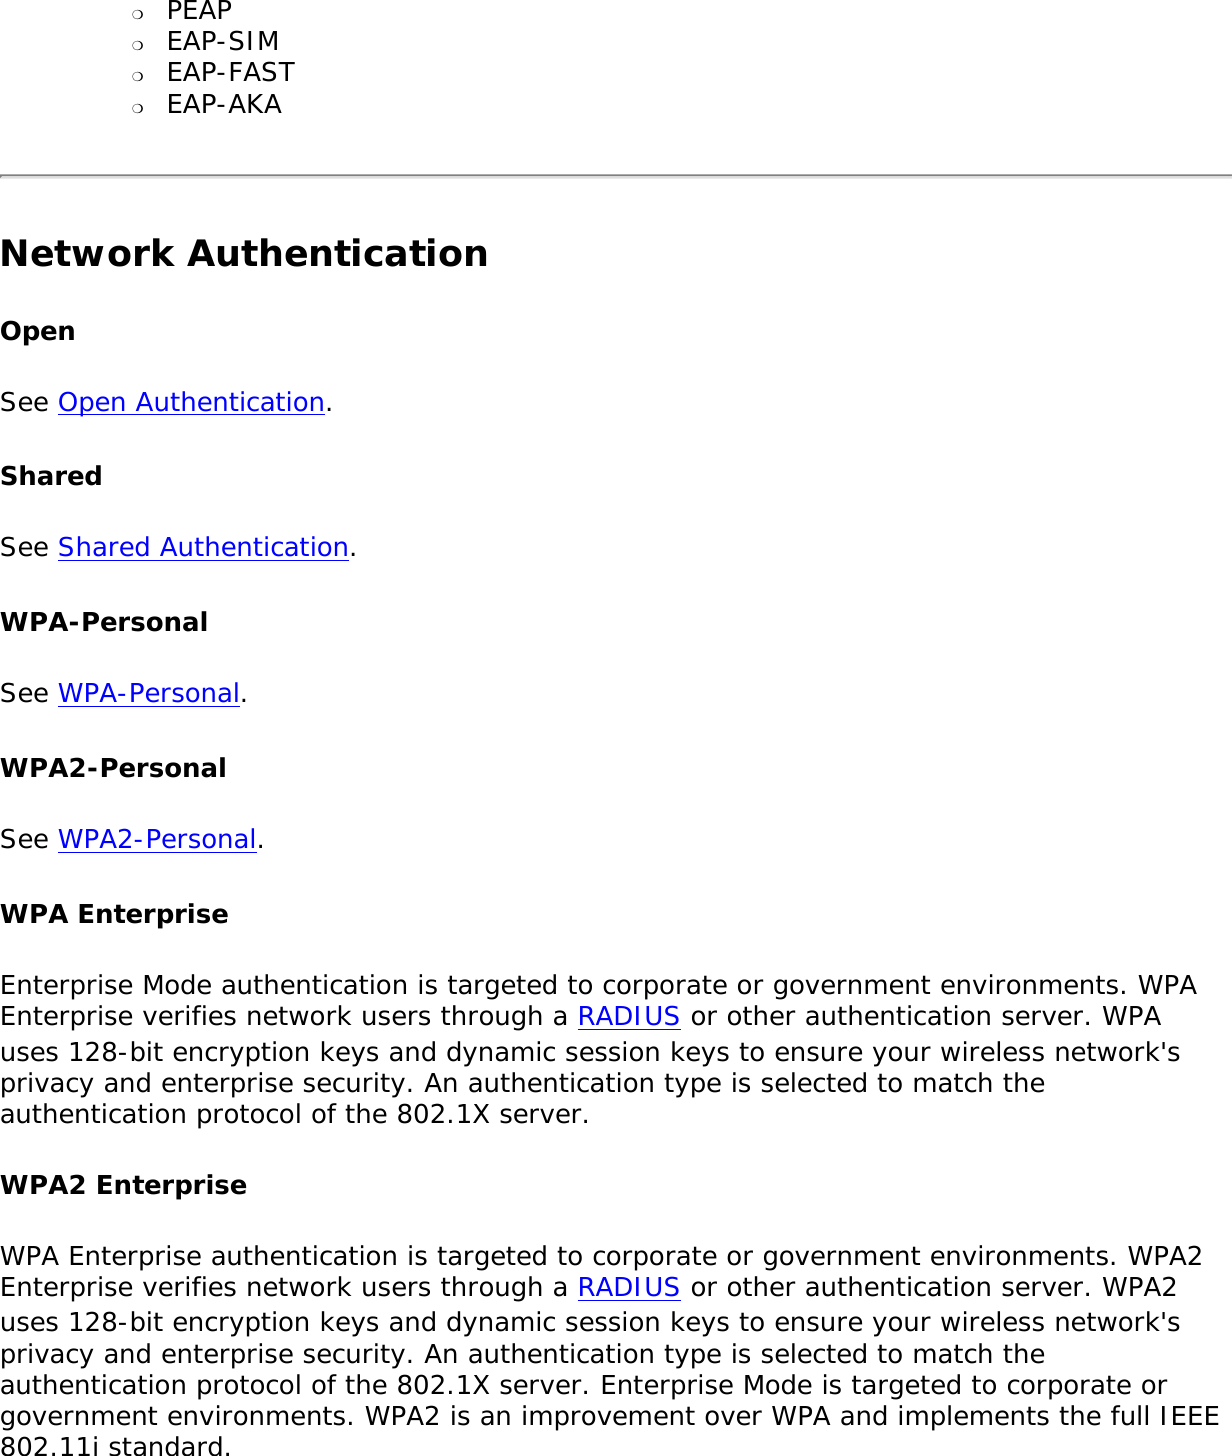 ❍     PEAP❍     EAP-SIM ❍     EAP-FAST❍     EAP-AKANetwork Authentication OpenSee Open Authentication.SharedSee Shared Authentication. WPA-PersonalSee WPA-Personal.WPA2-PersonalSee WPA2-Personal.WPA EnterpriseEnterprise Mode authentication is targeted to corporate or government environments. WPA Enterprise verifies network users through a RADIUS or other authentication server. WPA uses 128-bit encryption keys and dynamic session keys to ensure your wireless network&apos;s privacy and enterprise security. An authentication type is selected to match the authentication protocol of the 802.1X server. WPA2 EnterpriseWPA Enterprise authentication is targeted to corporate or government environments. WPA2 Enterprise verifies network users through a RADIUS or other authentication server. WPA2 uses 128-bit encryption keys and dynamic session keys to ensure your wireless network&apos;s privacy and enterprise security. An authentication type is selected to match the authentication protocol of the 802.1X server. Enterprise Mode is targeted to corporate or government environments. WPA2 is an improvement over WPA and implements the full IEEE 802.11i standard. 